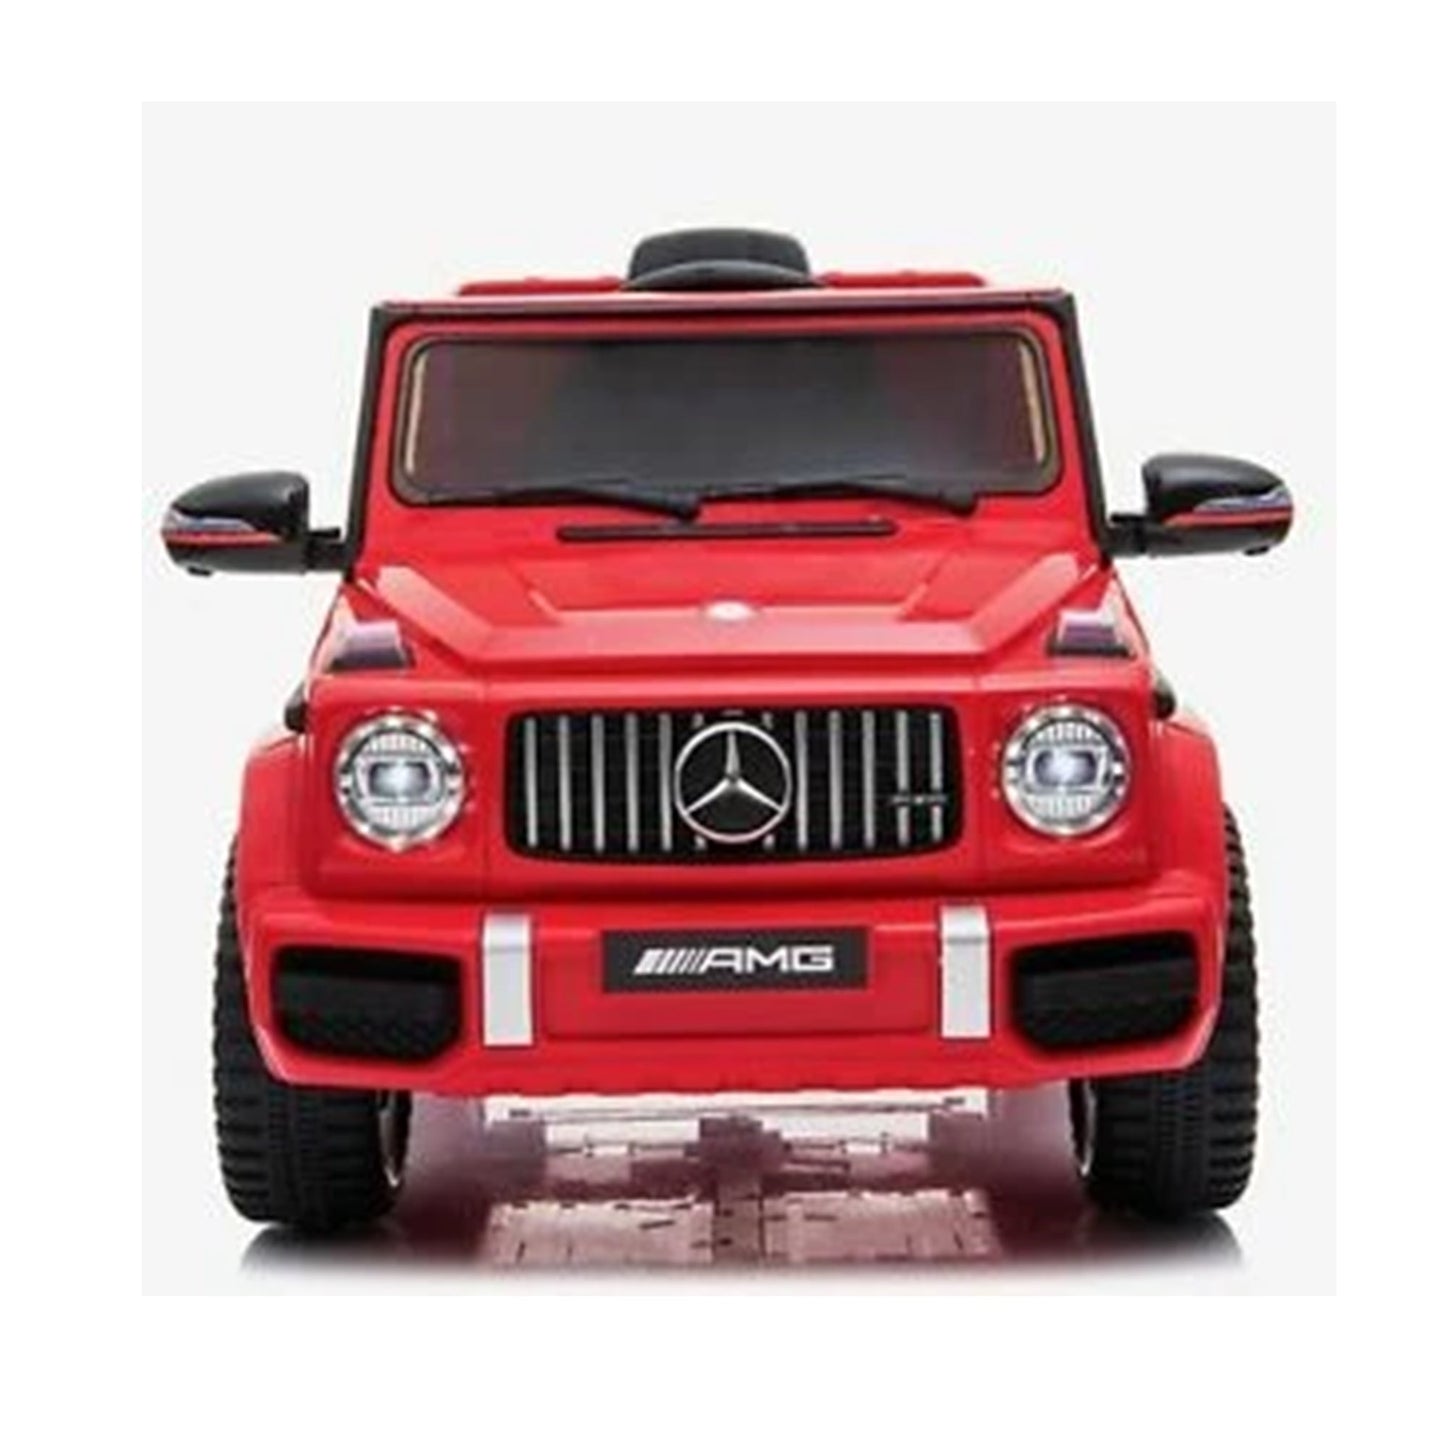 "Red Mercedes-Benz G63 AMG 12 Volt Electric Ride-on Car at Kids Car Store"